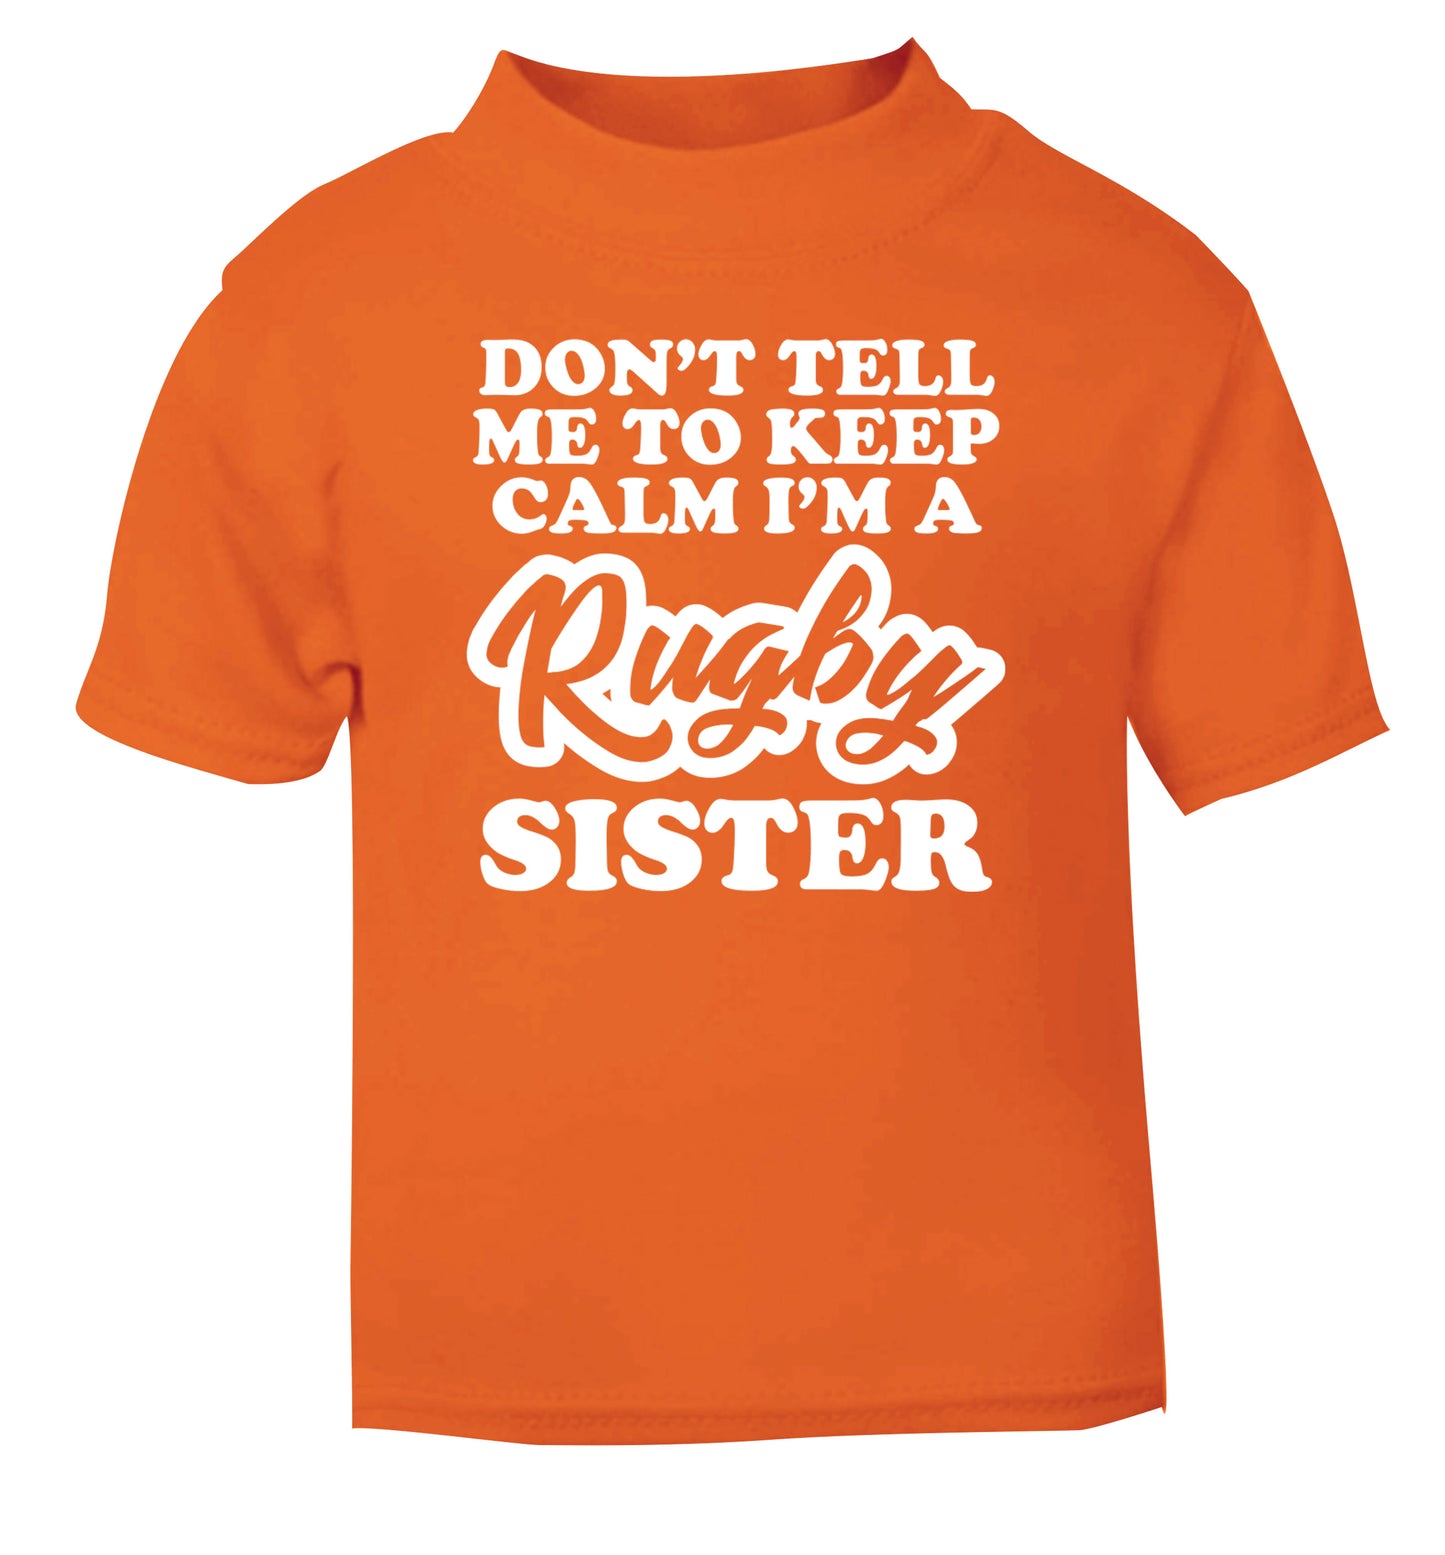 Don't tell me keep calm I'm a rugby sister orange Baby Toddler Tshirt 2 Years